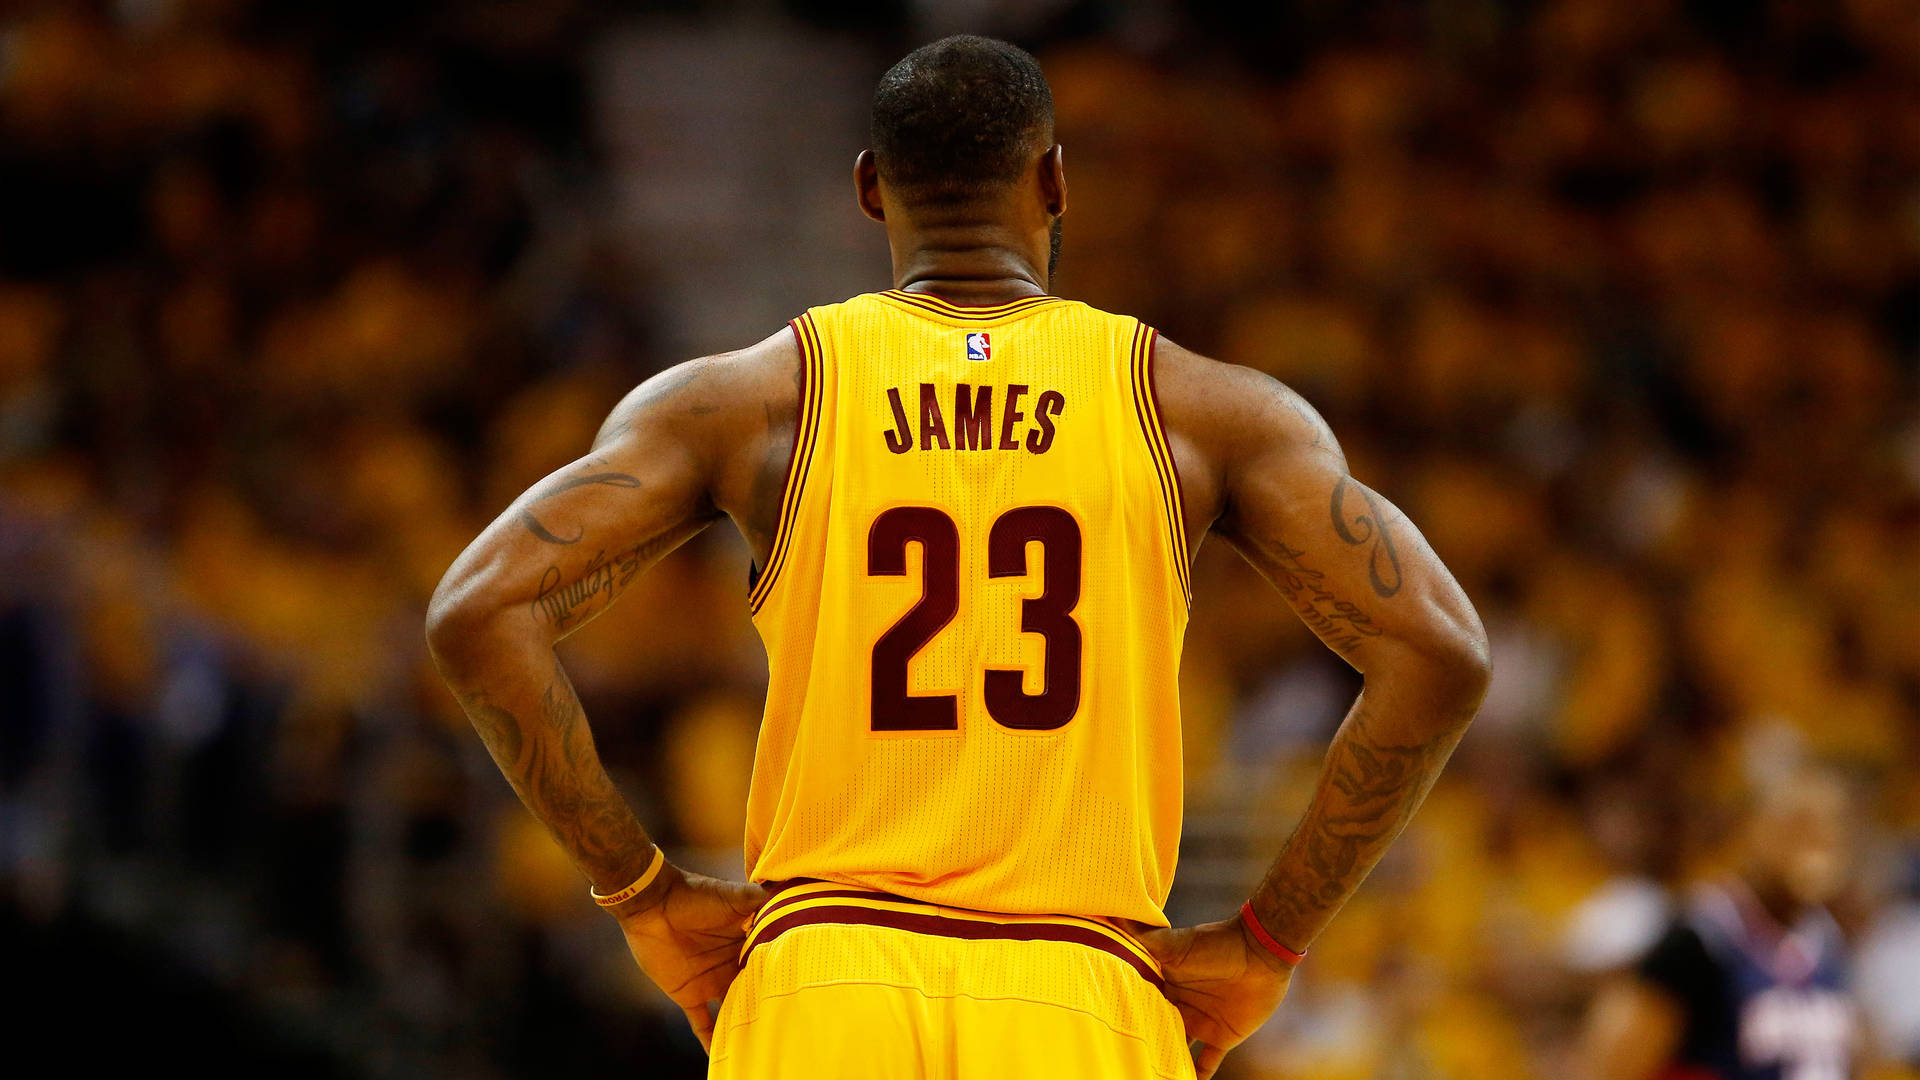 Cleveland Cavaliers Lebron On Yellow Jersey